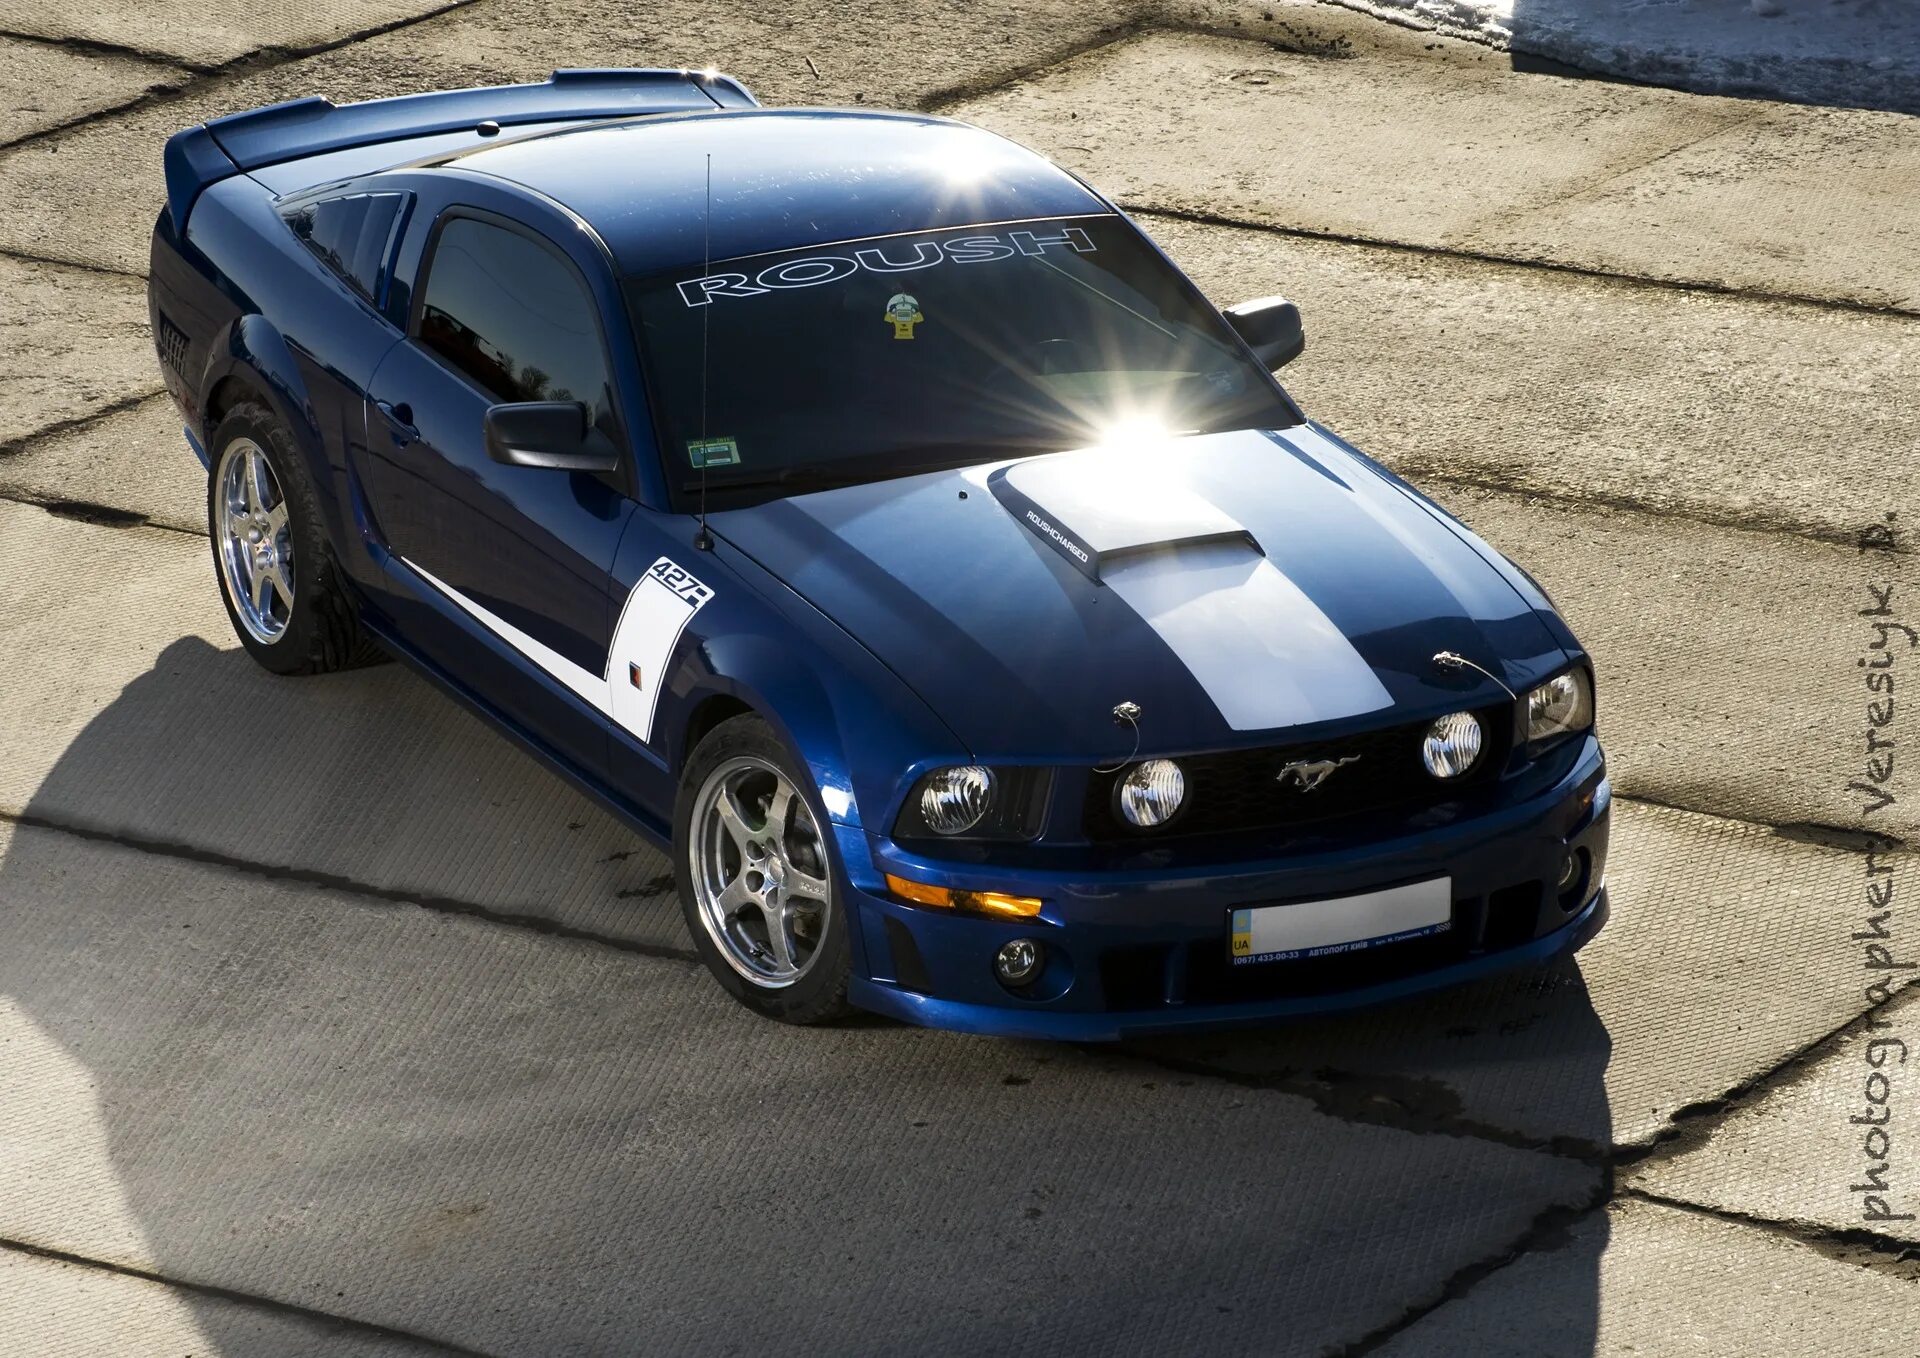 Форд Мустанг 5. Форд Мустанг 5.0. Ford Mustang 2005. Ford Mustang 4.6 2005.